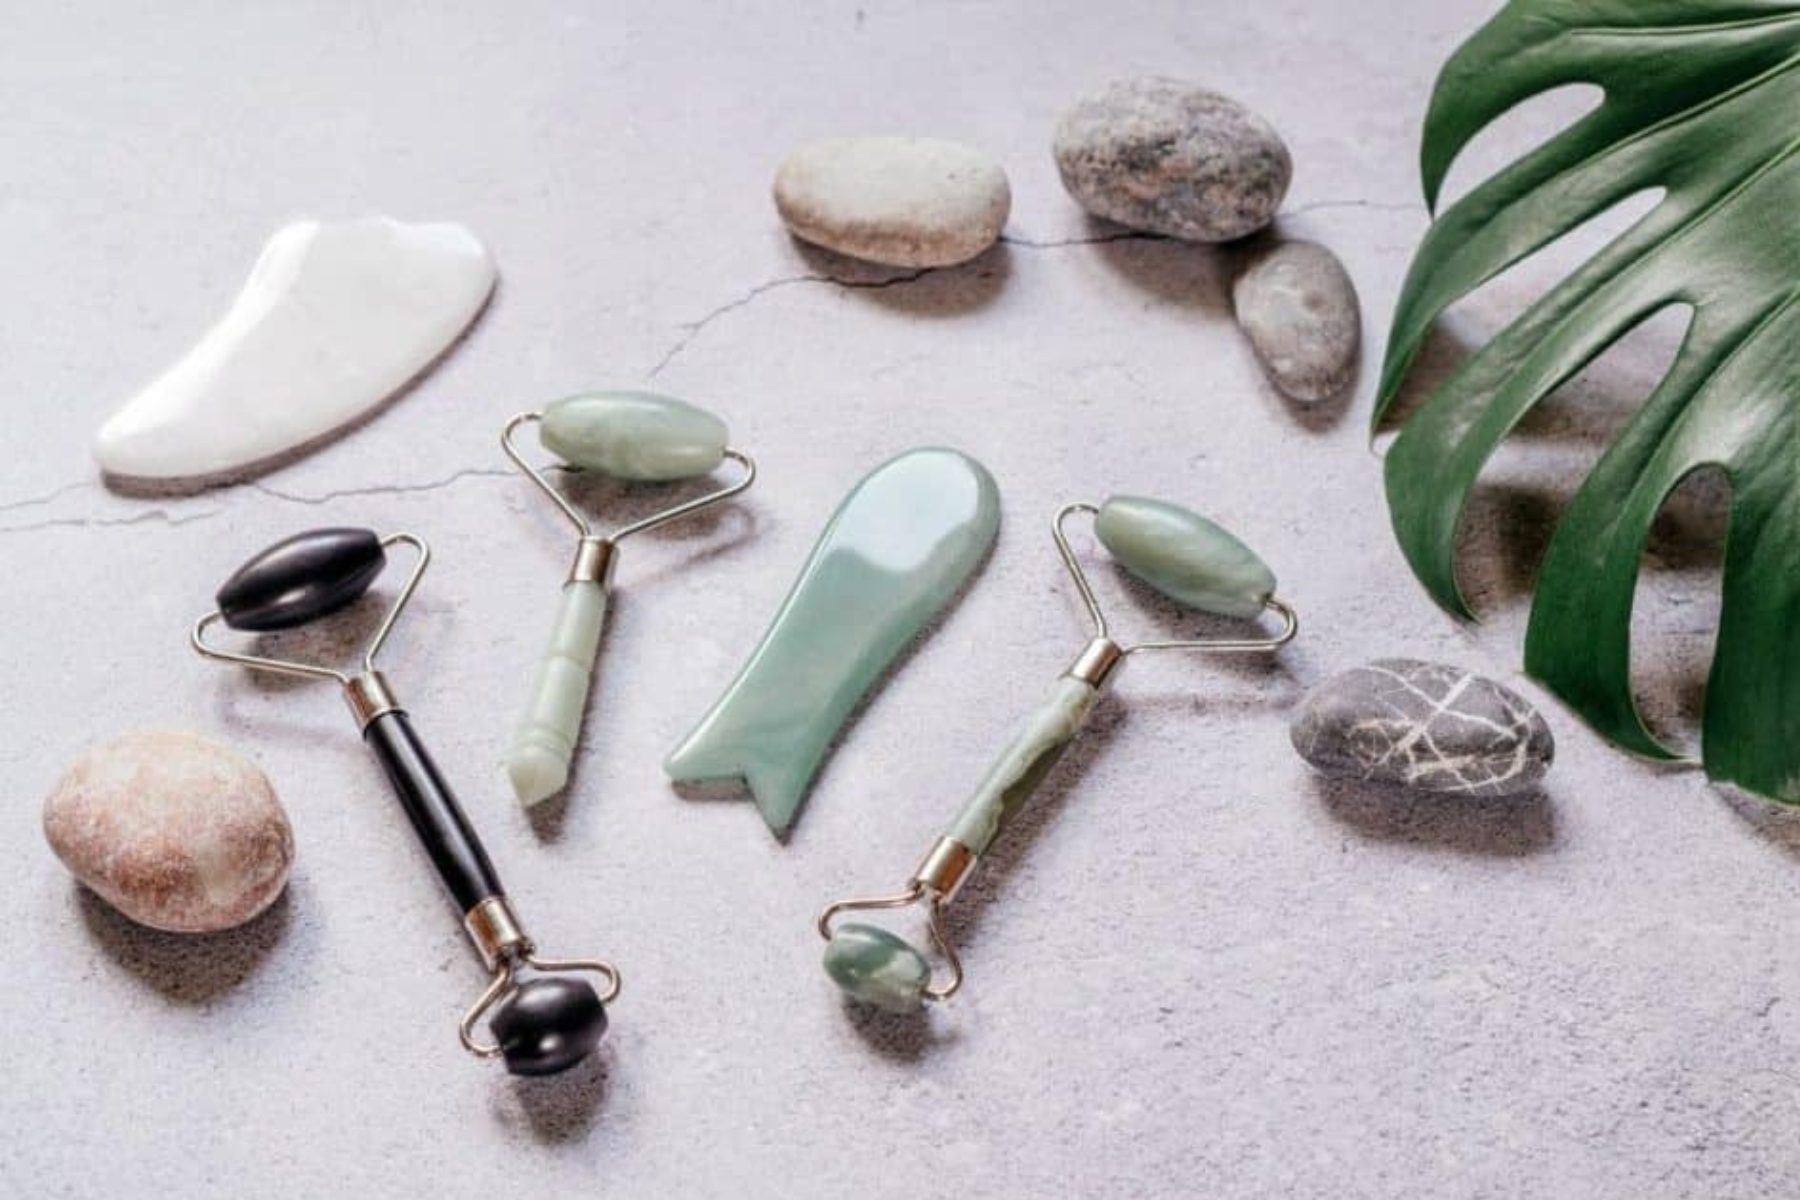 A group of three gemstone tools is placed next to various gemstones